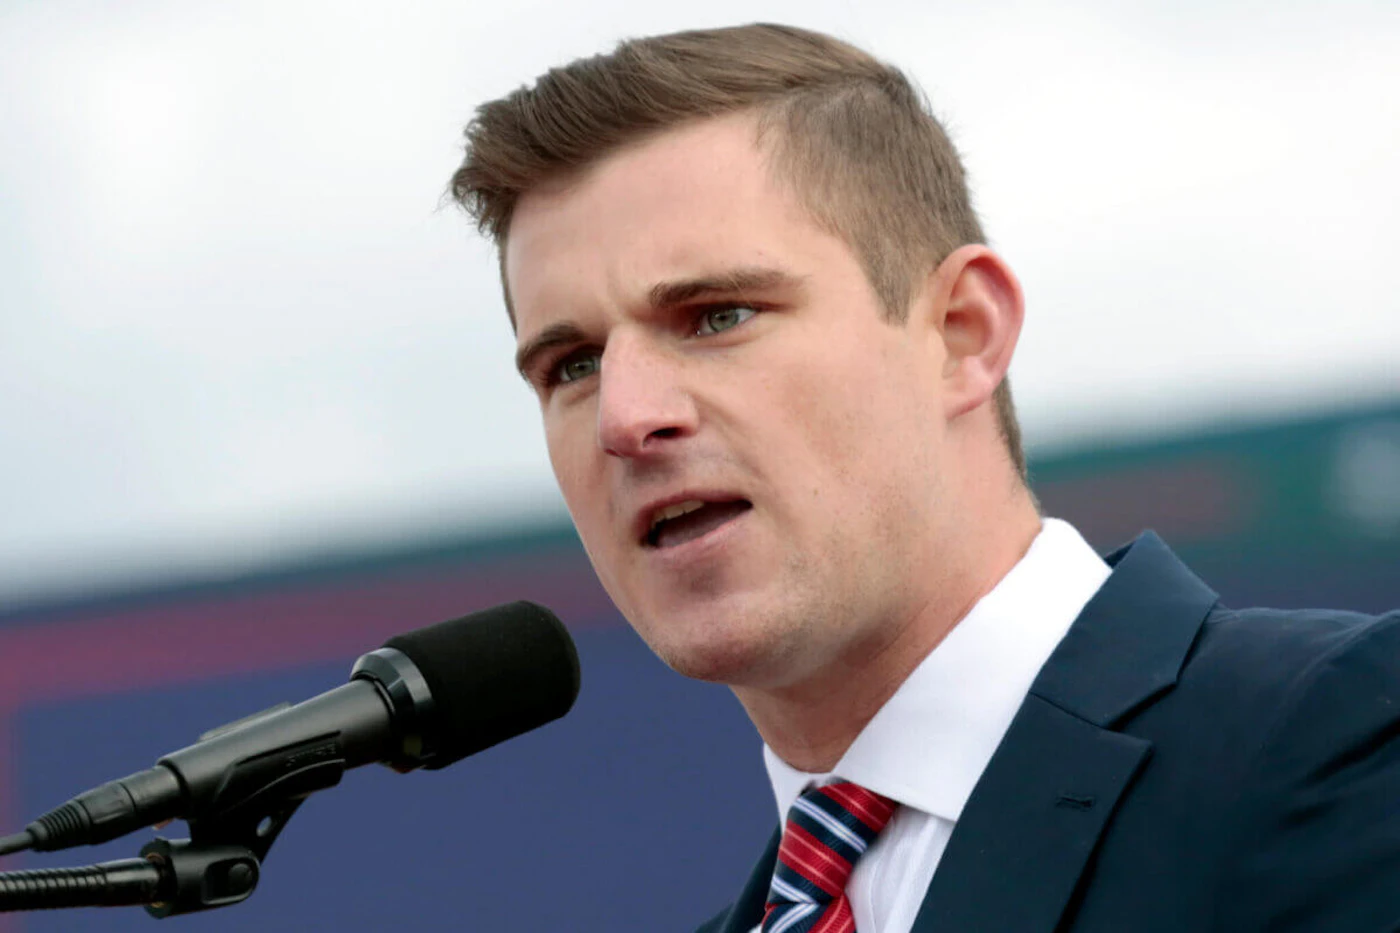 Republican candidate for U.S. House of Representatives Bo Hines, of North Carolina, speaks to the crowd before former President Donald Trump takes the stage at a rally Saturday, April 9, 2022, in Selma, N.C. (AP Photo/Chris Seward)